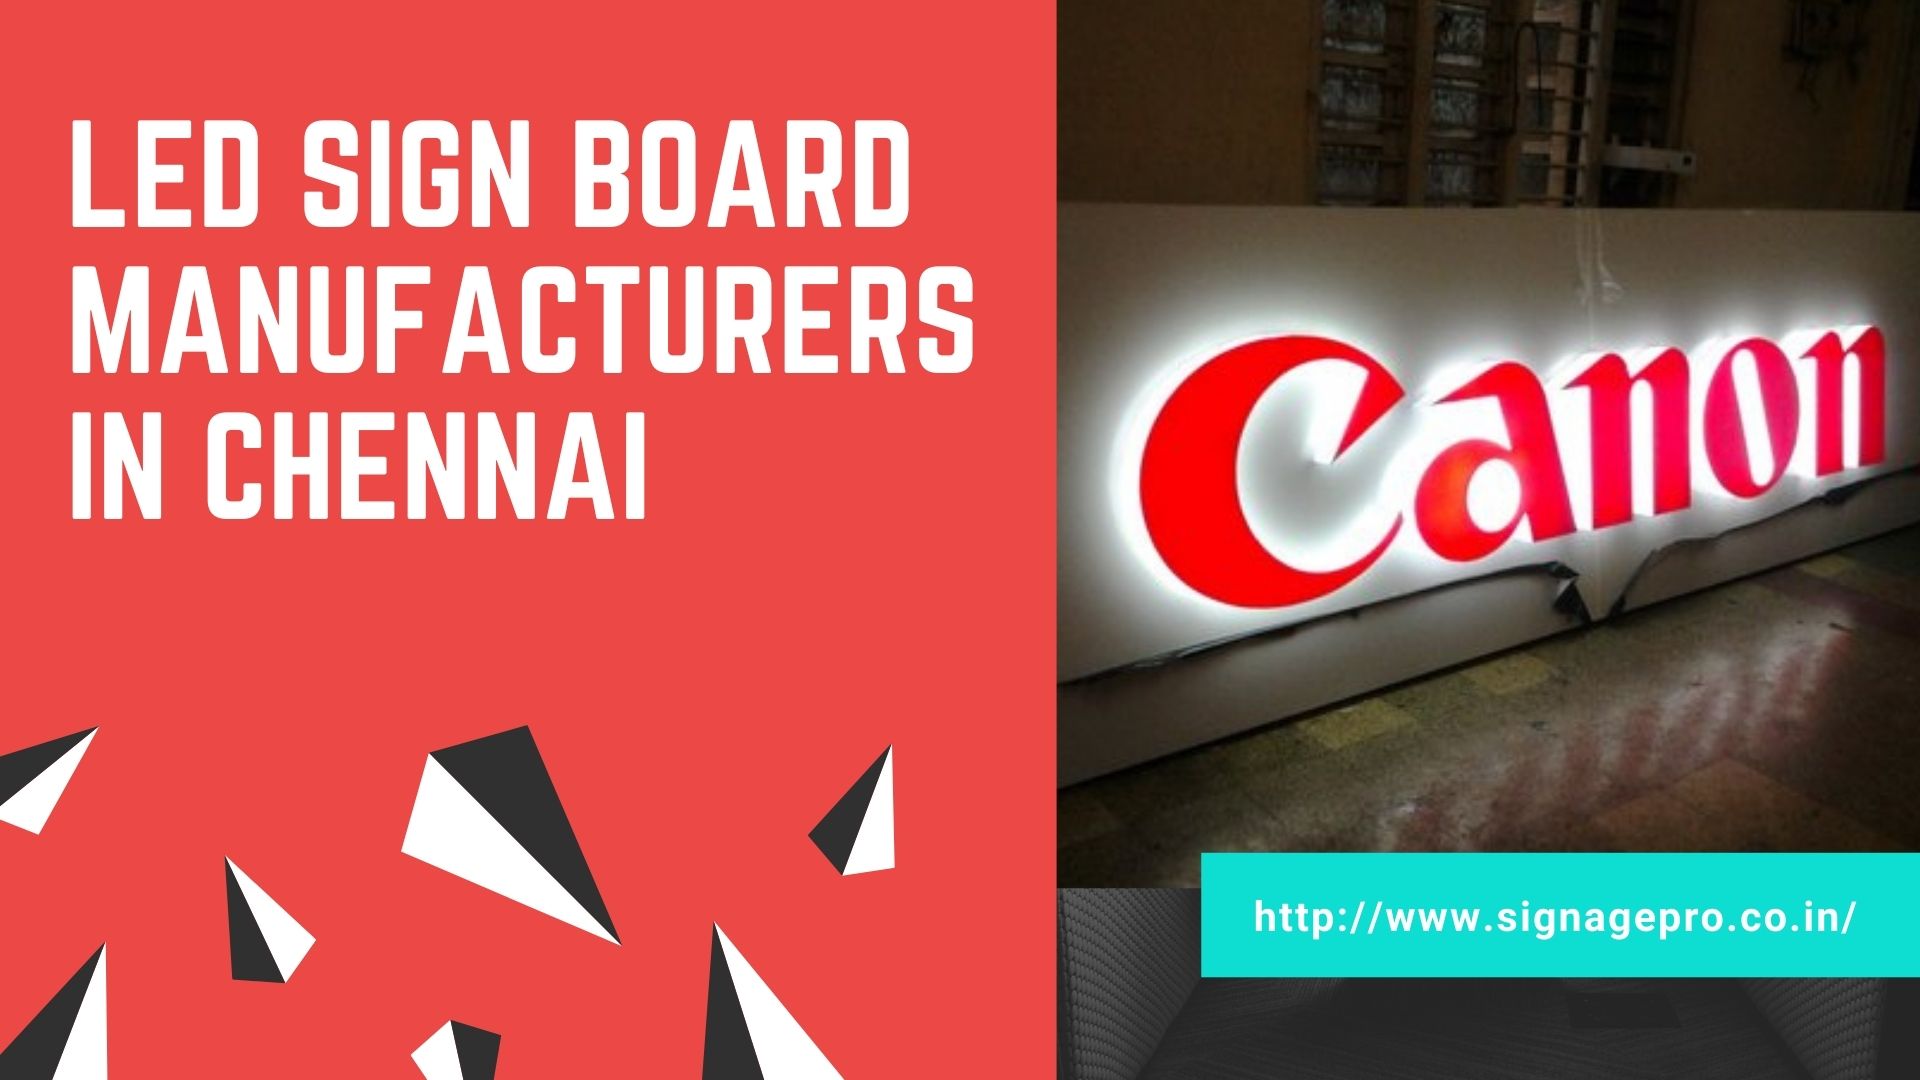 Signagepro - LED, ACP Sign Board Manufacturers in Chennai